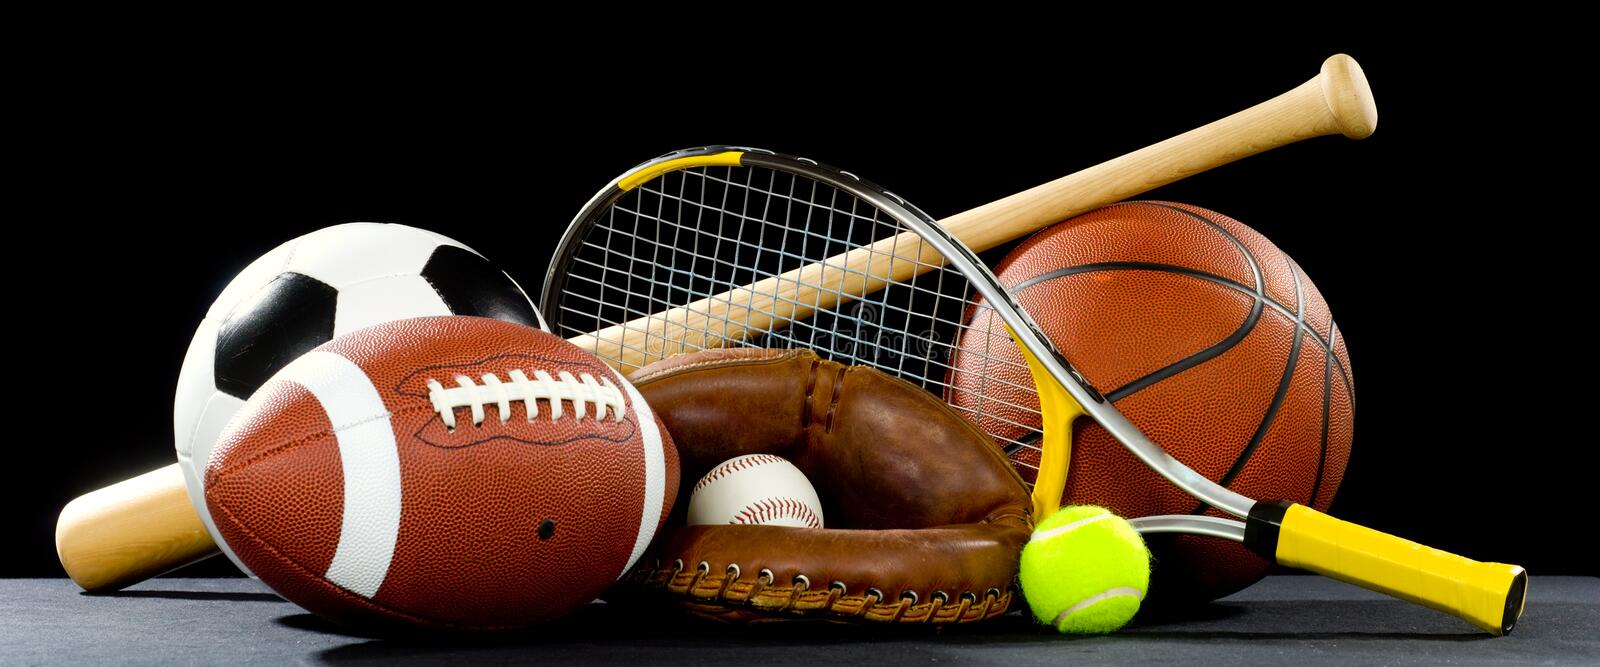 Find the Best Sports Equipment Deals for Your Booster Club Sport